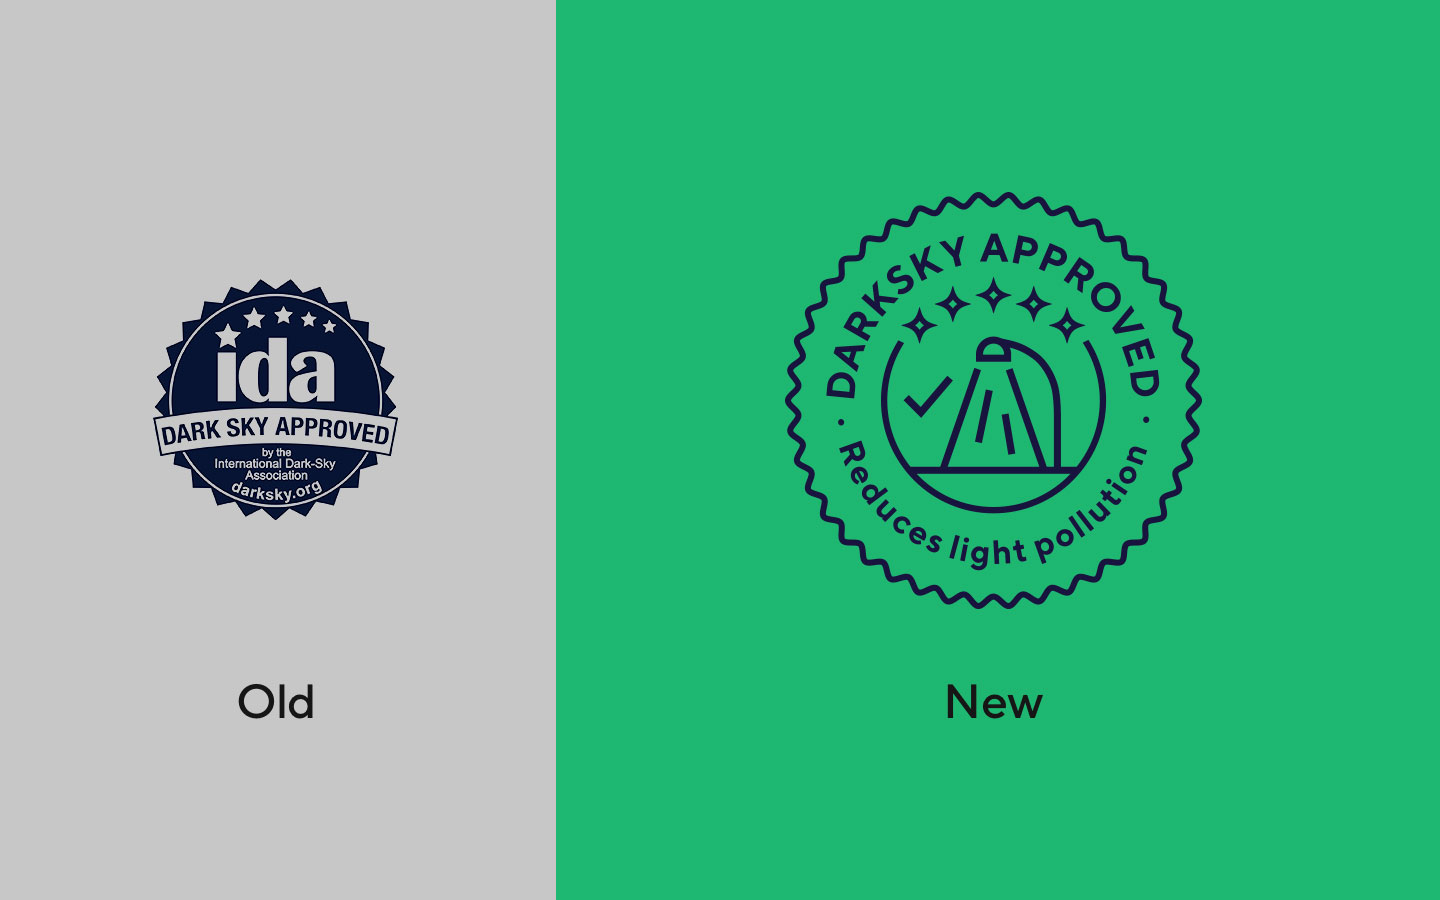 The new DarkSky Approved logo and the old one.